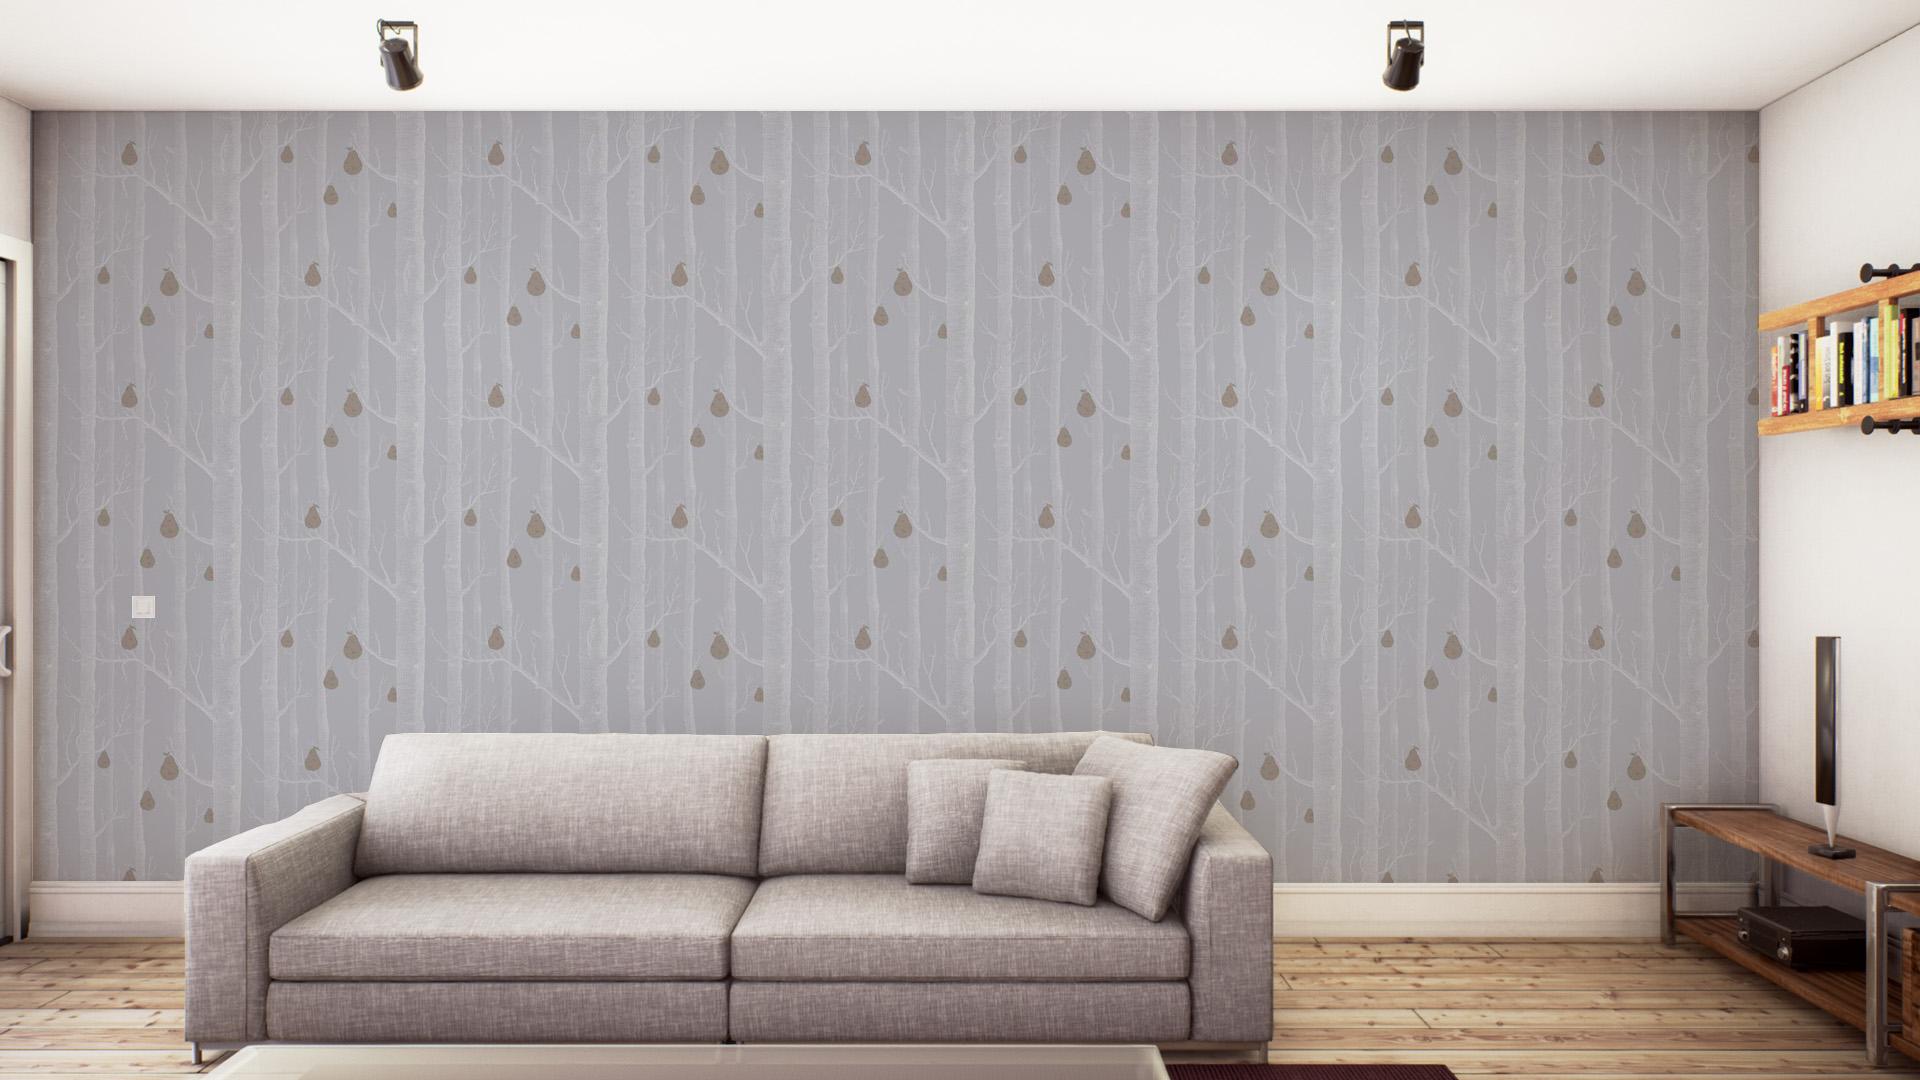 woods and pears wallpaper,wall,wallpaper,room,furniture,couch